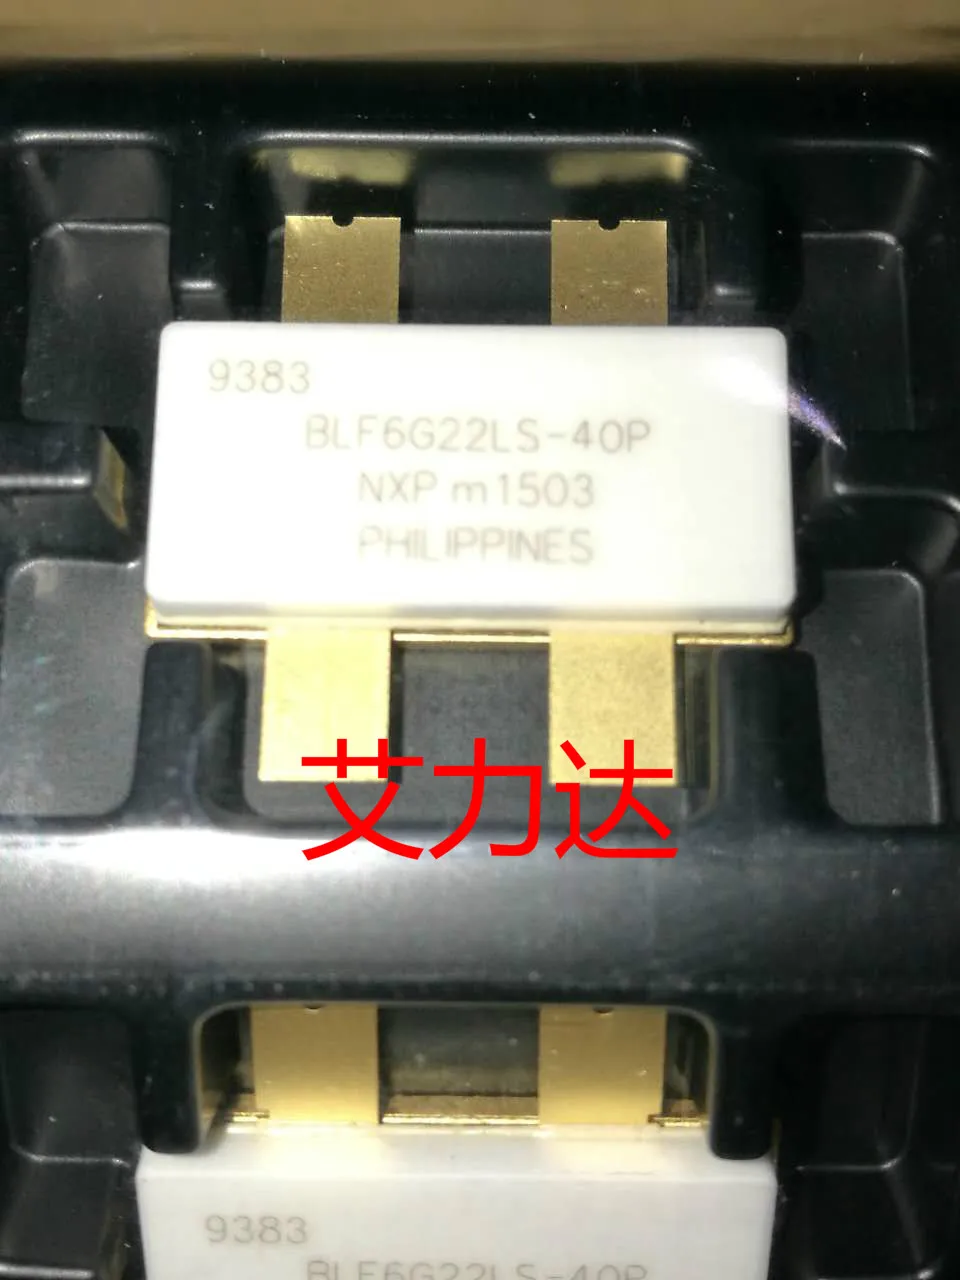 

FreeShipping BLF6G22LS-40P 2.2GHZ Specializing in high frequency devices